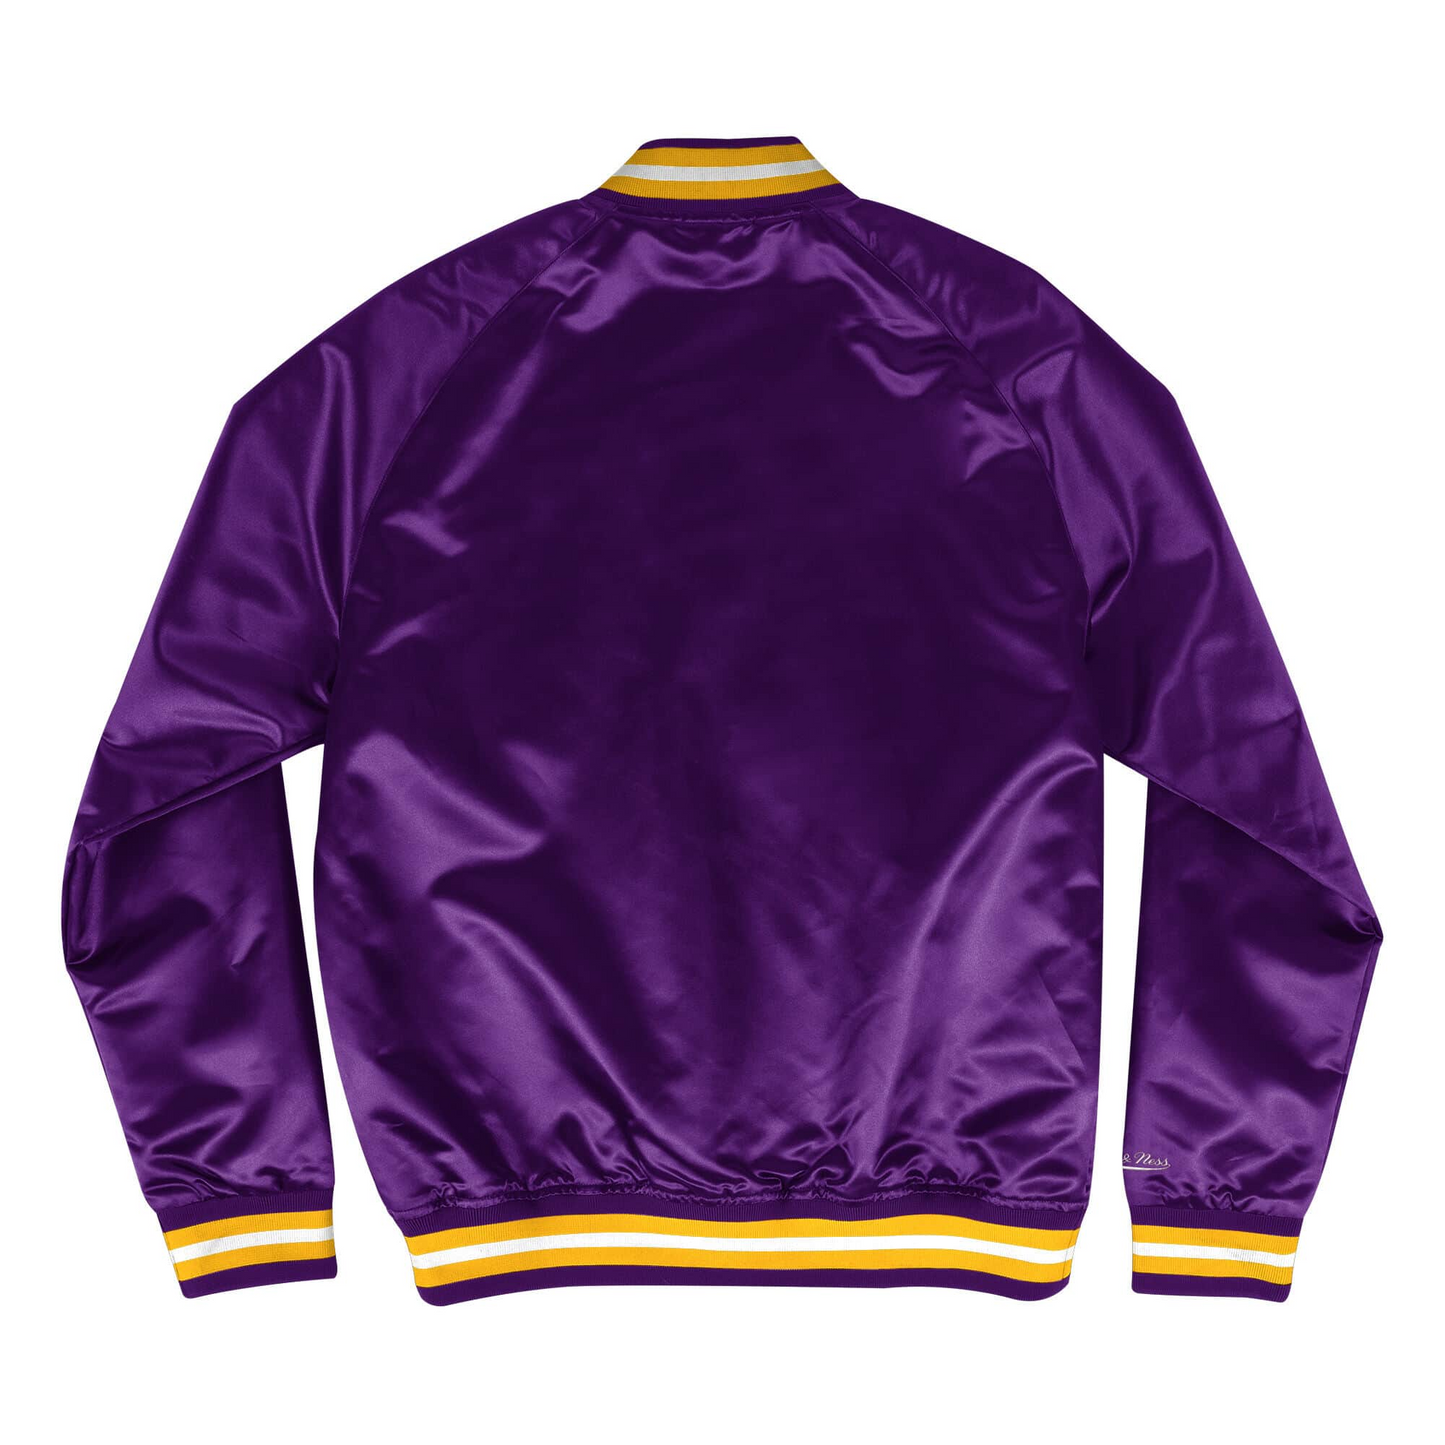 LOS ANGELES LAKERS YOUTH MITCHELL & NESS SATIN JACKET - PURPLE